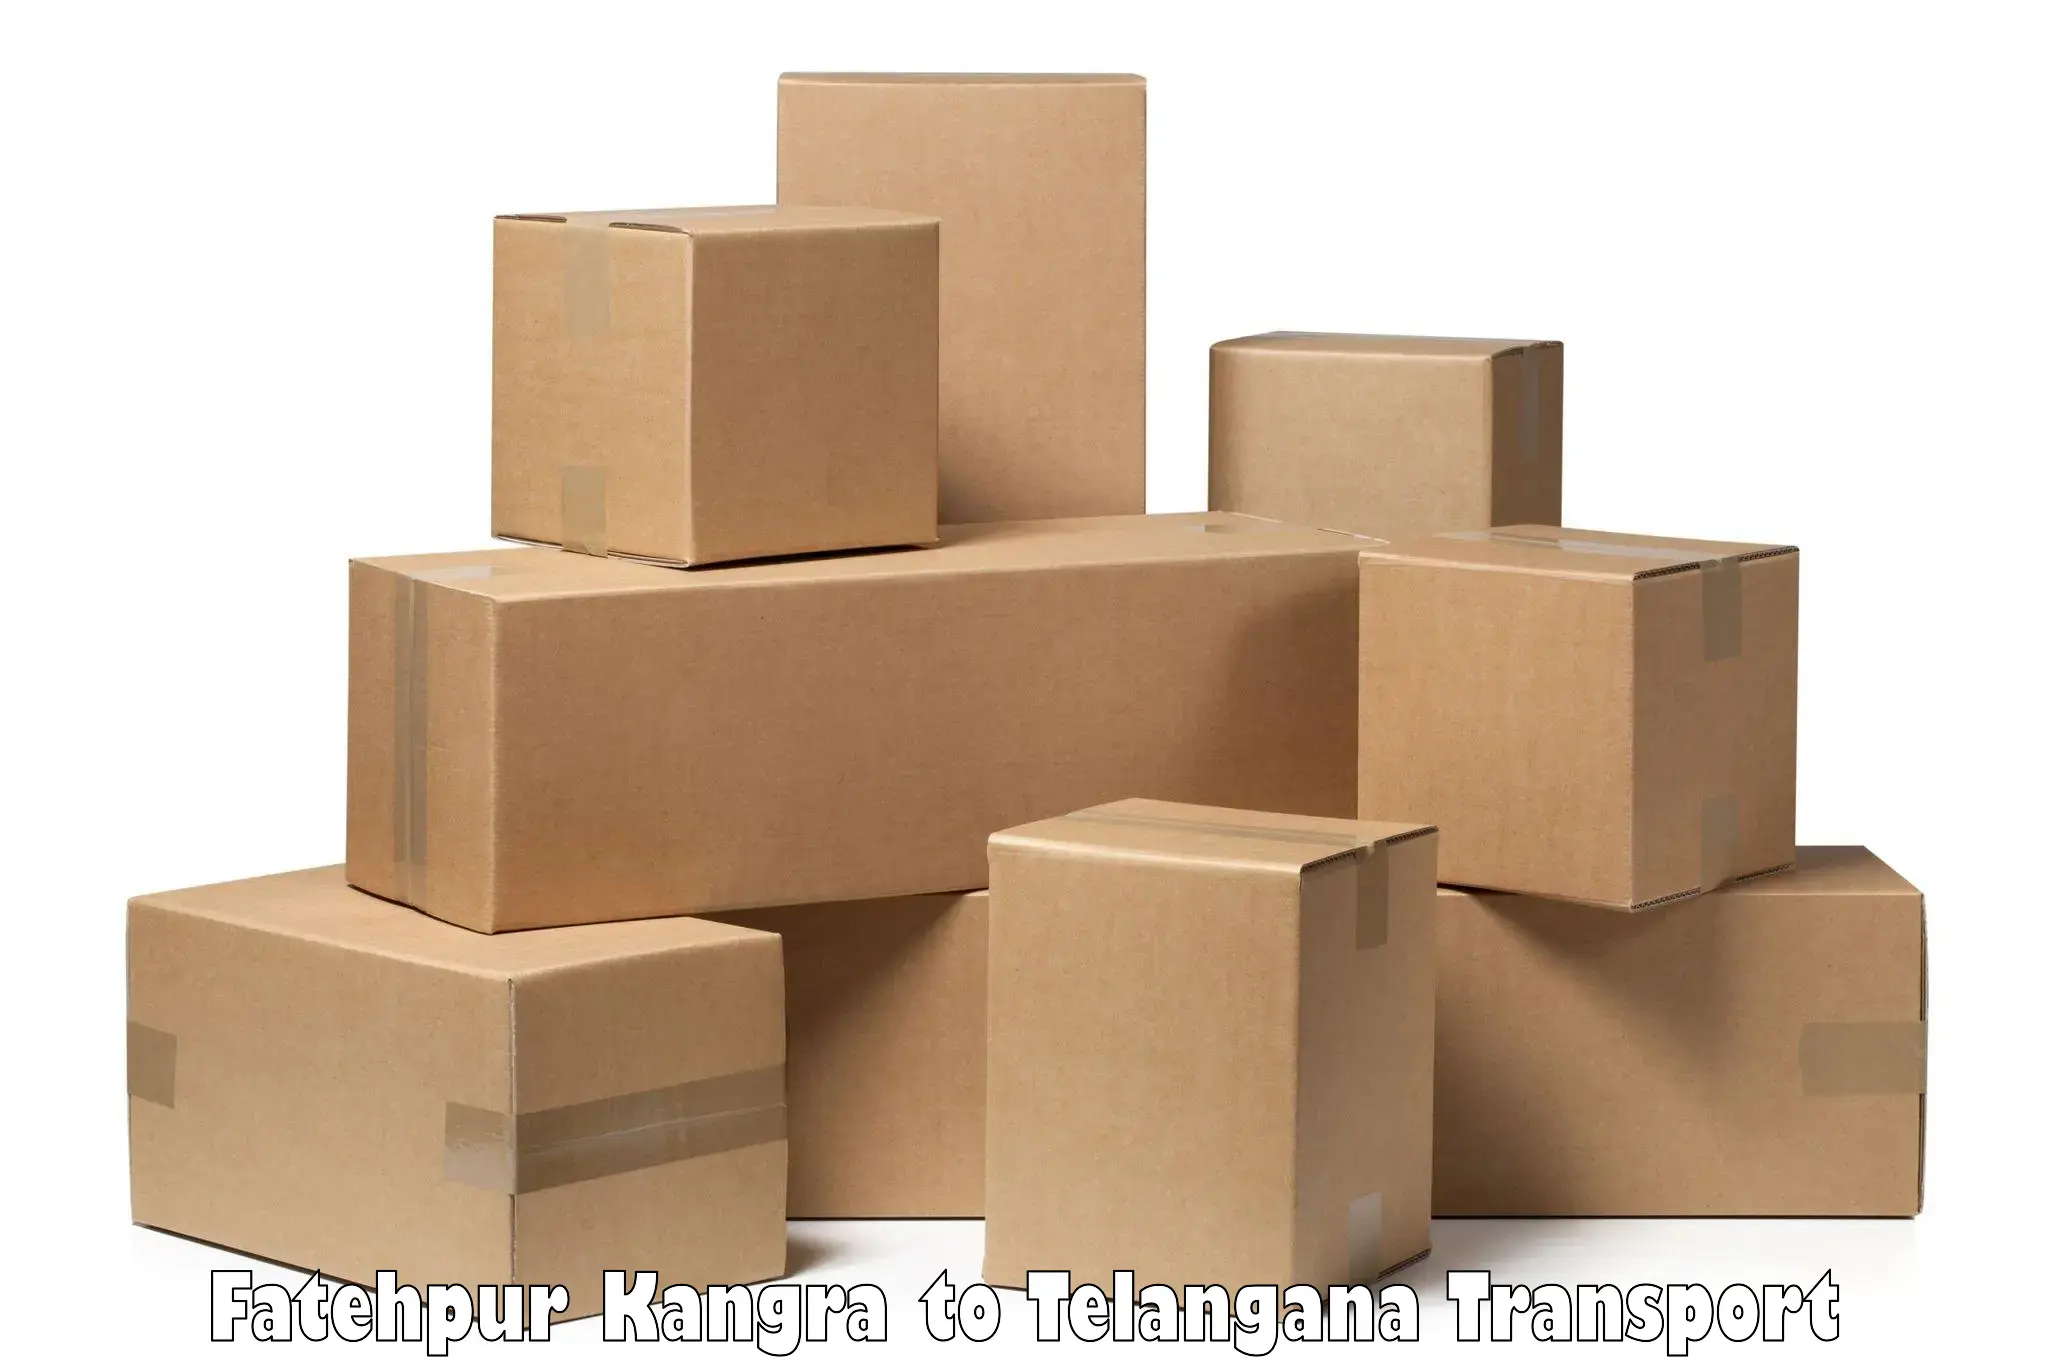 Container transport service Fatehpur Kangra to Manneguda